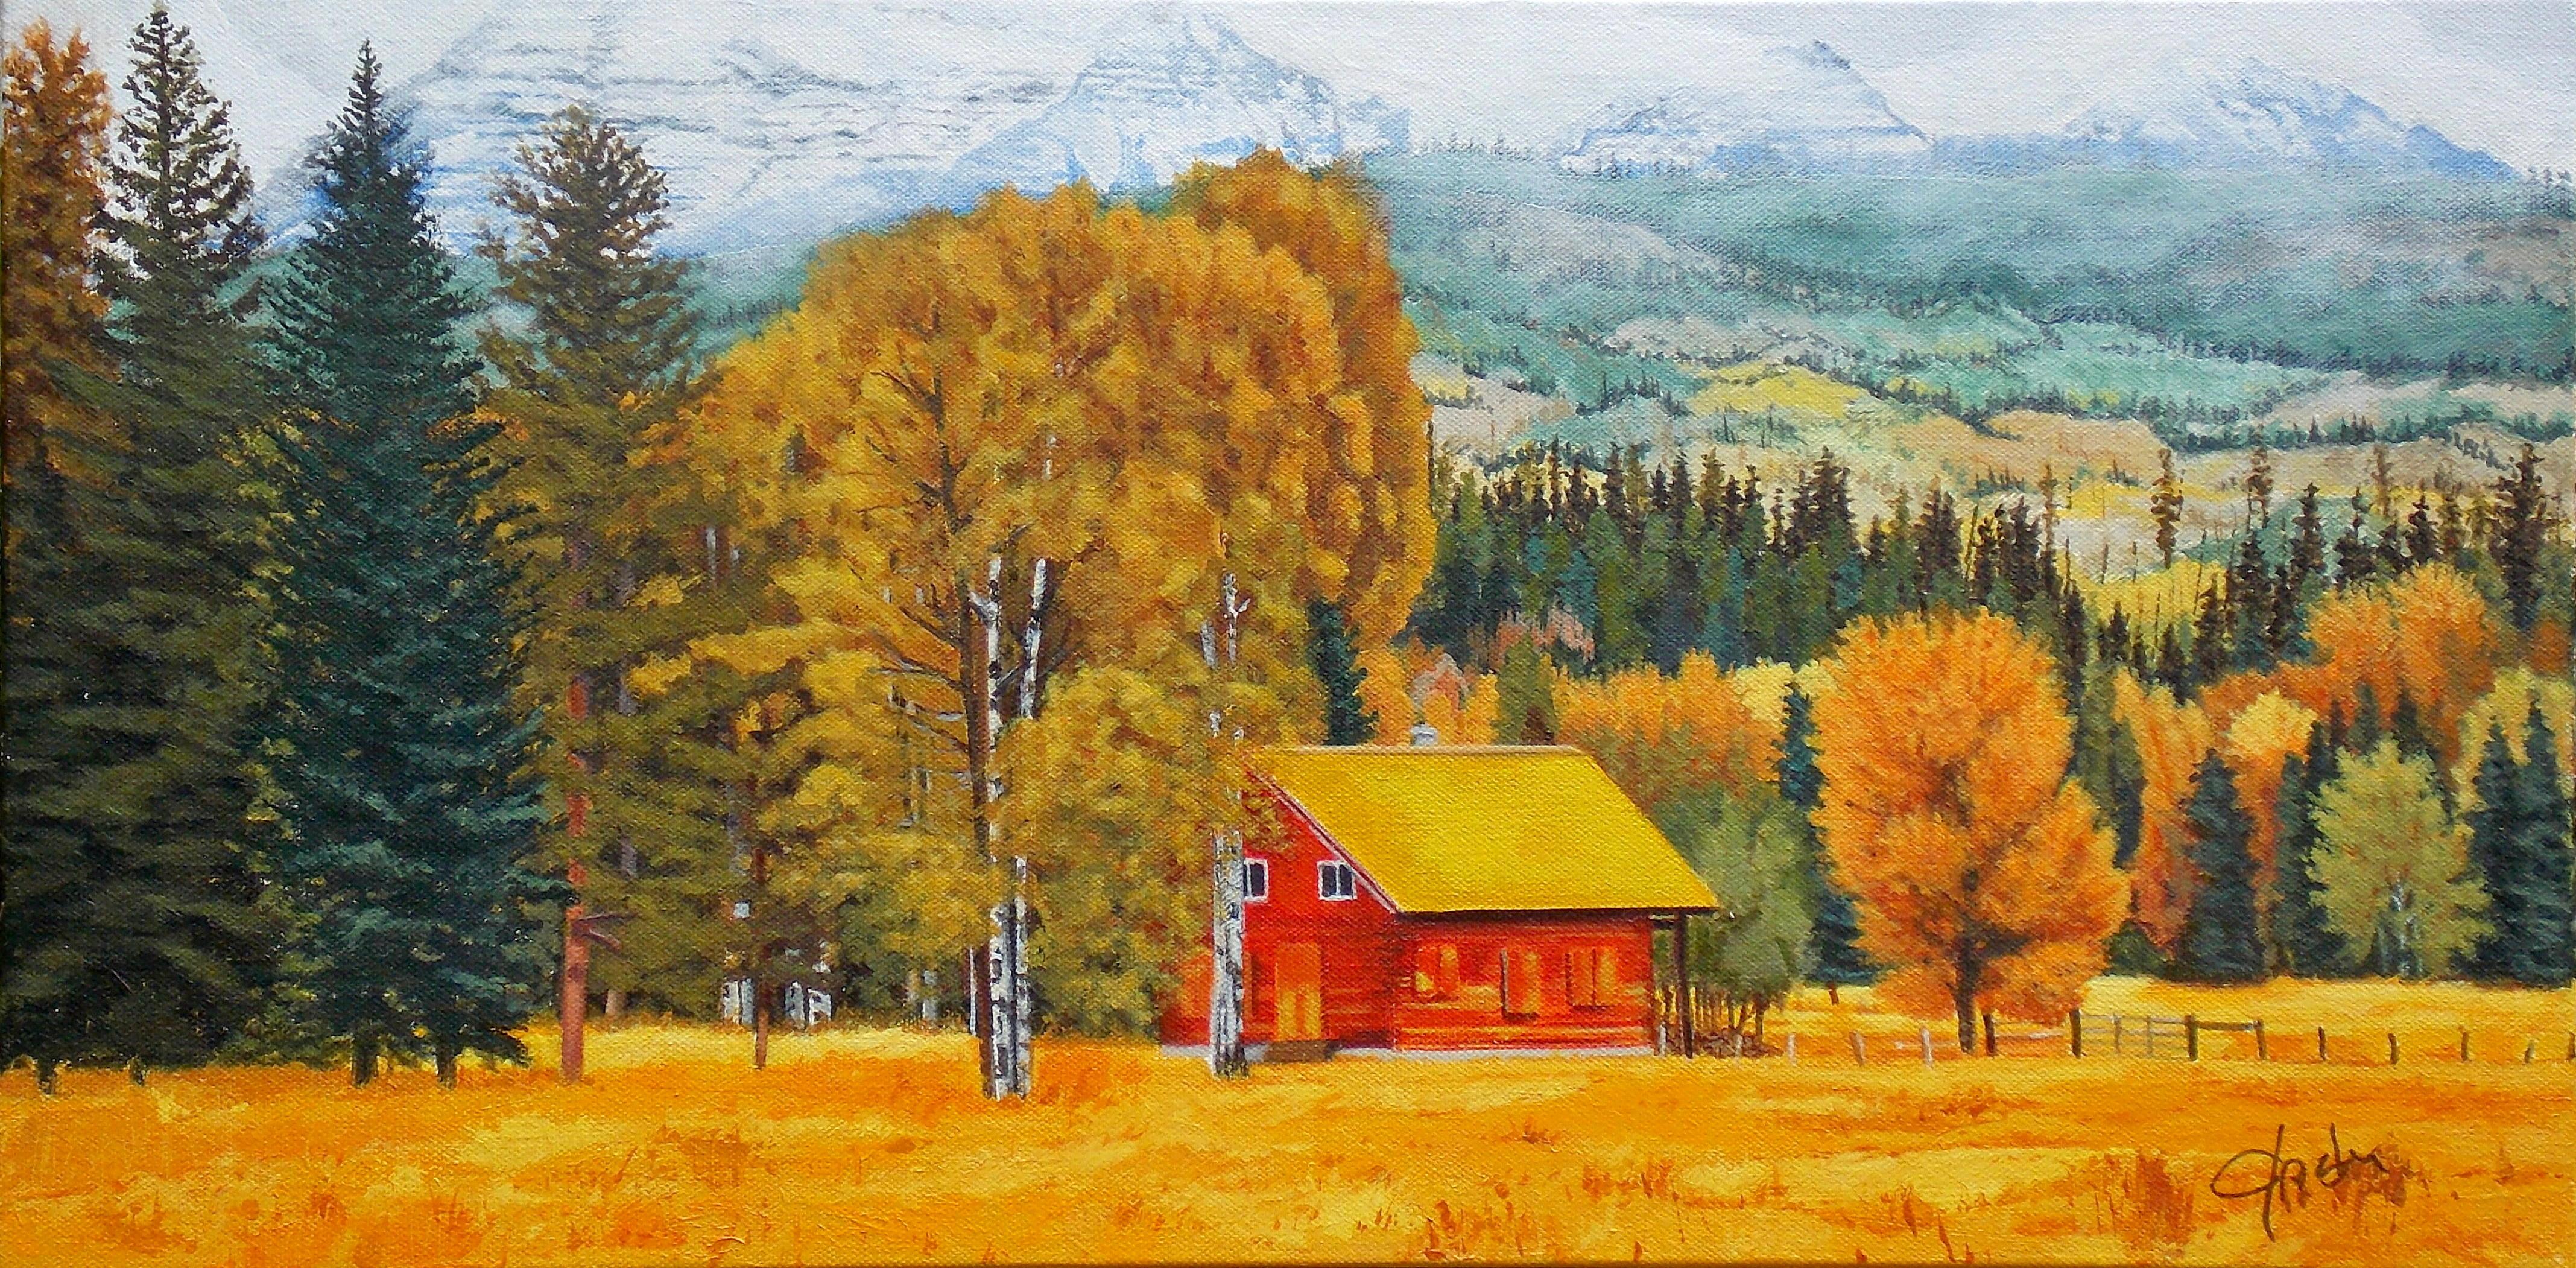 The Red Cabin, Original Painting - Art by John Jaster